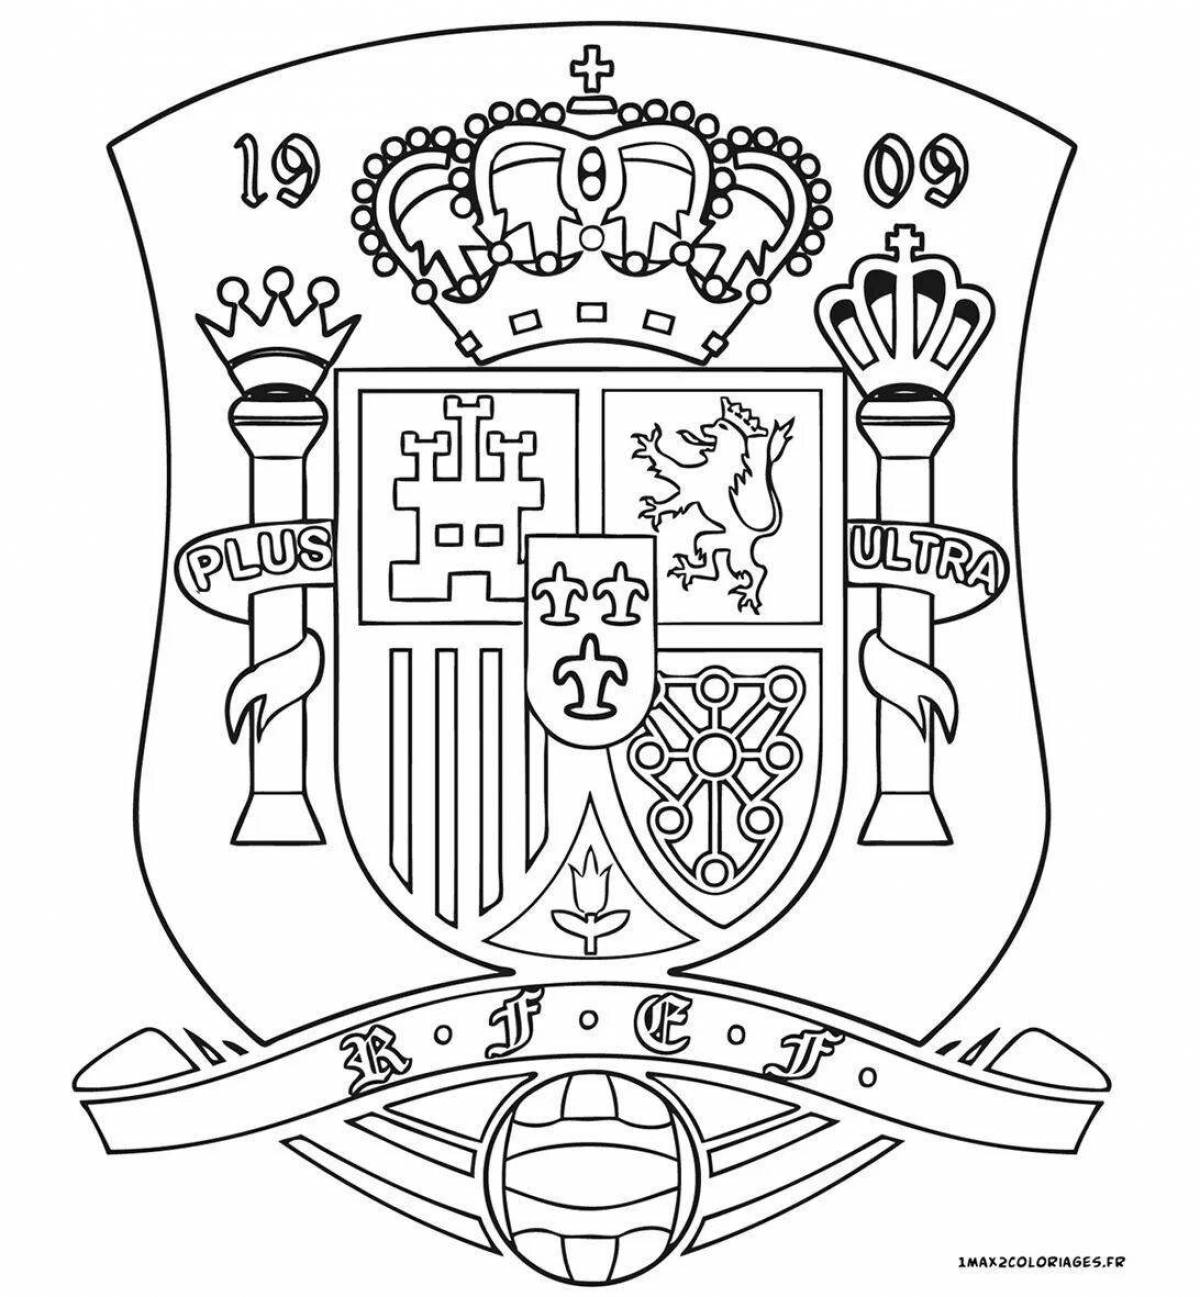 Coat of arms of Yekaterinburg #2